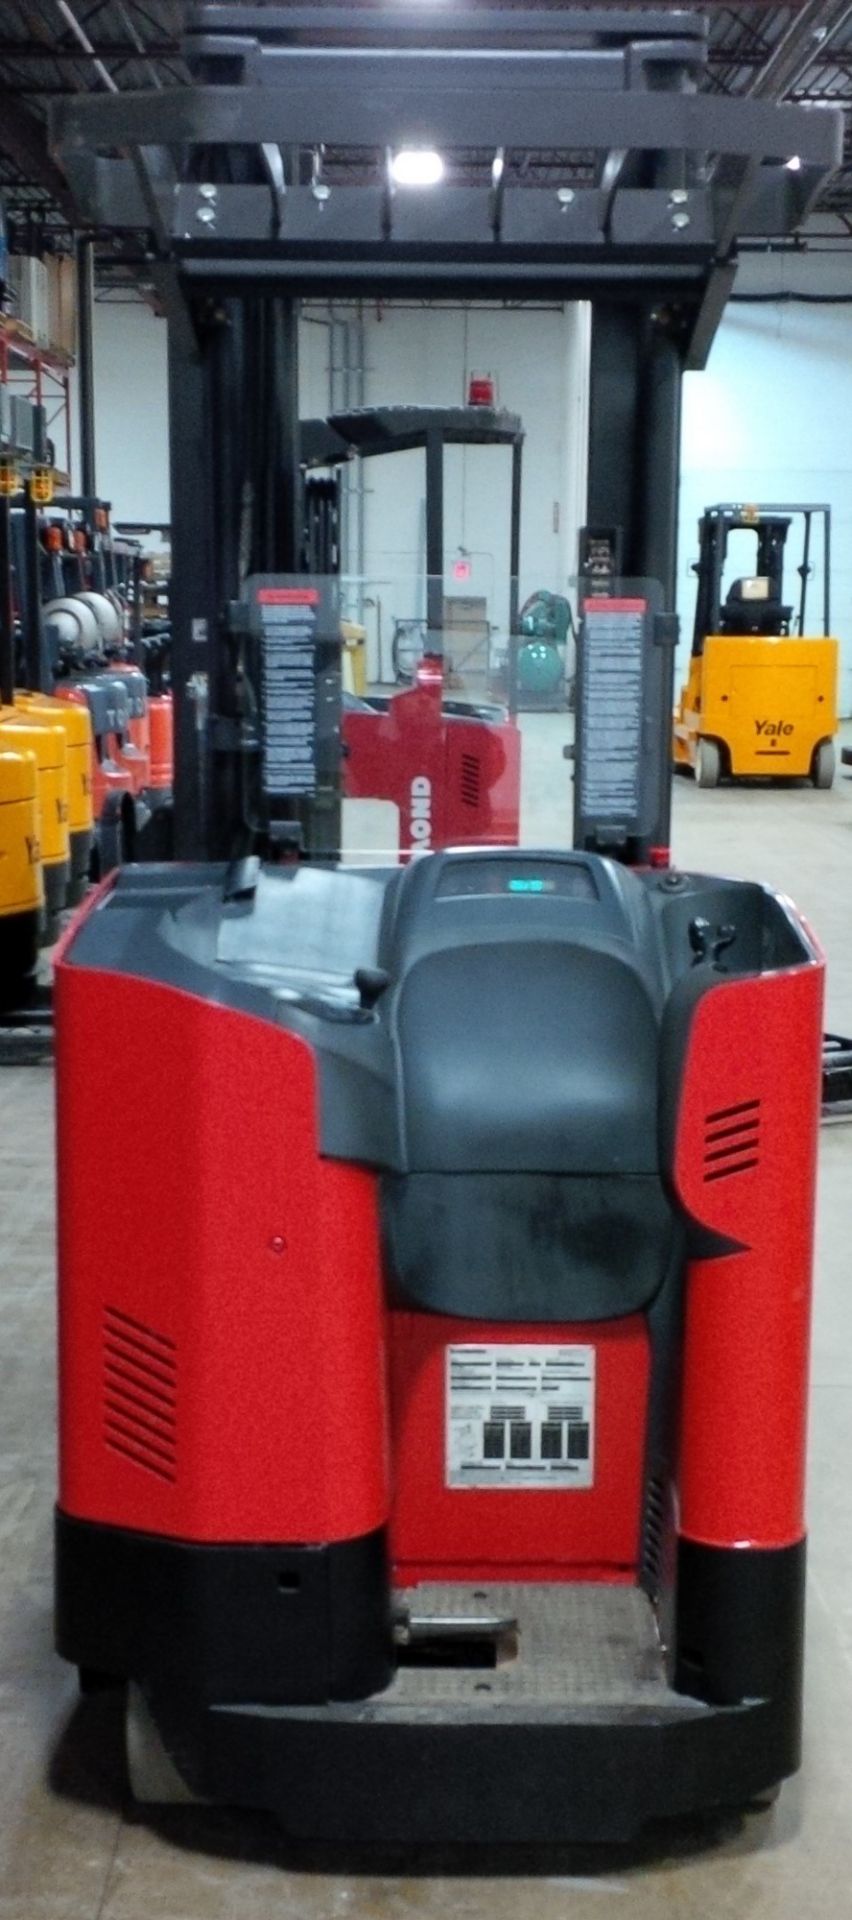 RAYMOND (2010) 740-R45TT 36V ELECTRIC REACH TRUCK WITH 4500 LB. CAPACITY, 226" VERTICAL LIFT, S/N: - Image 2 of 2